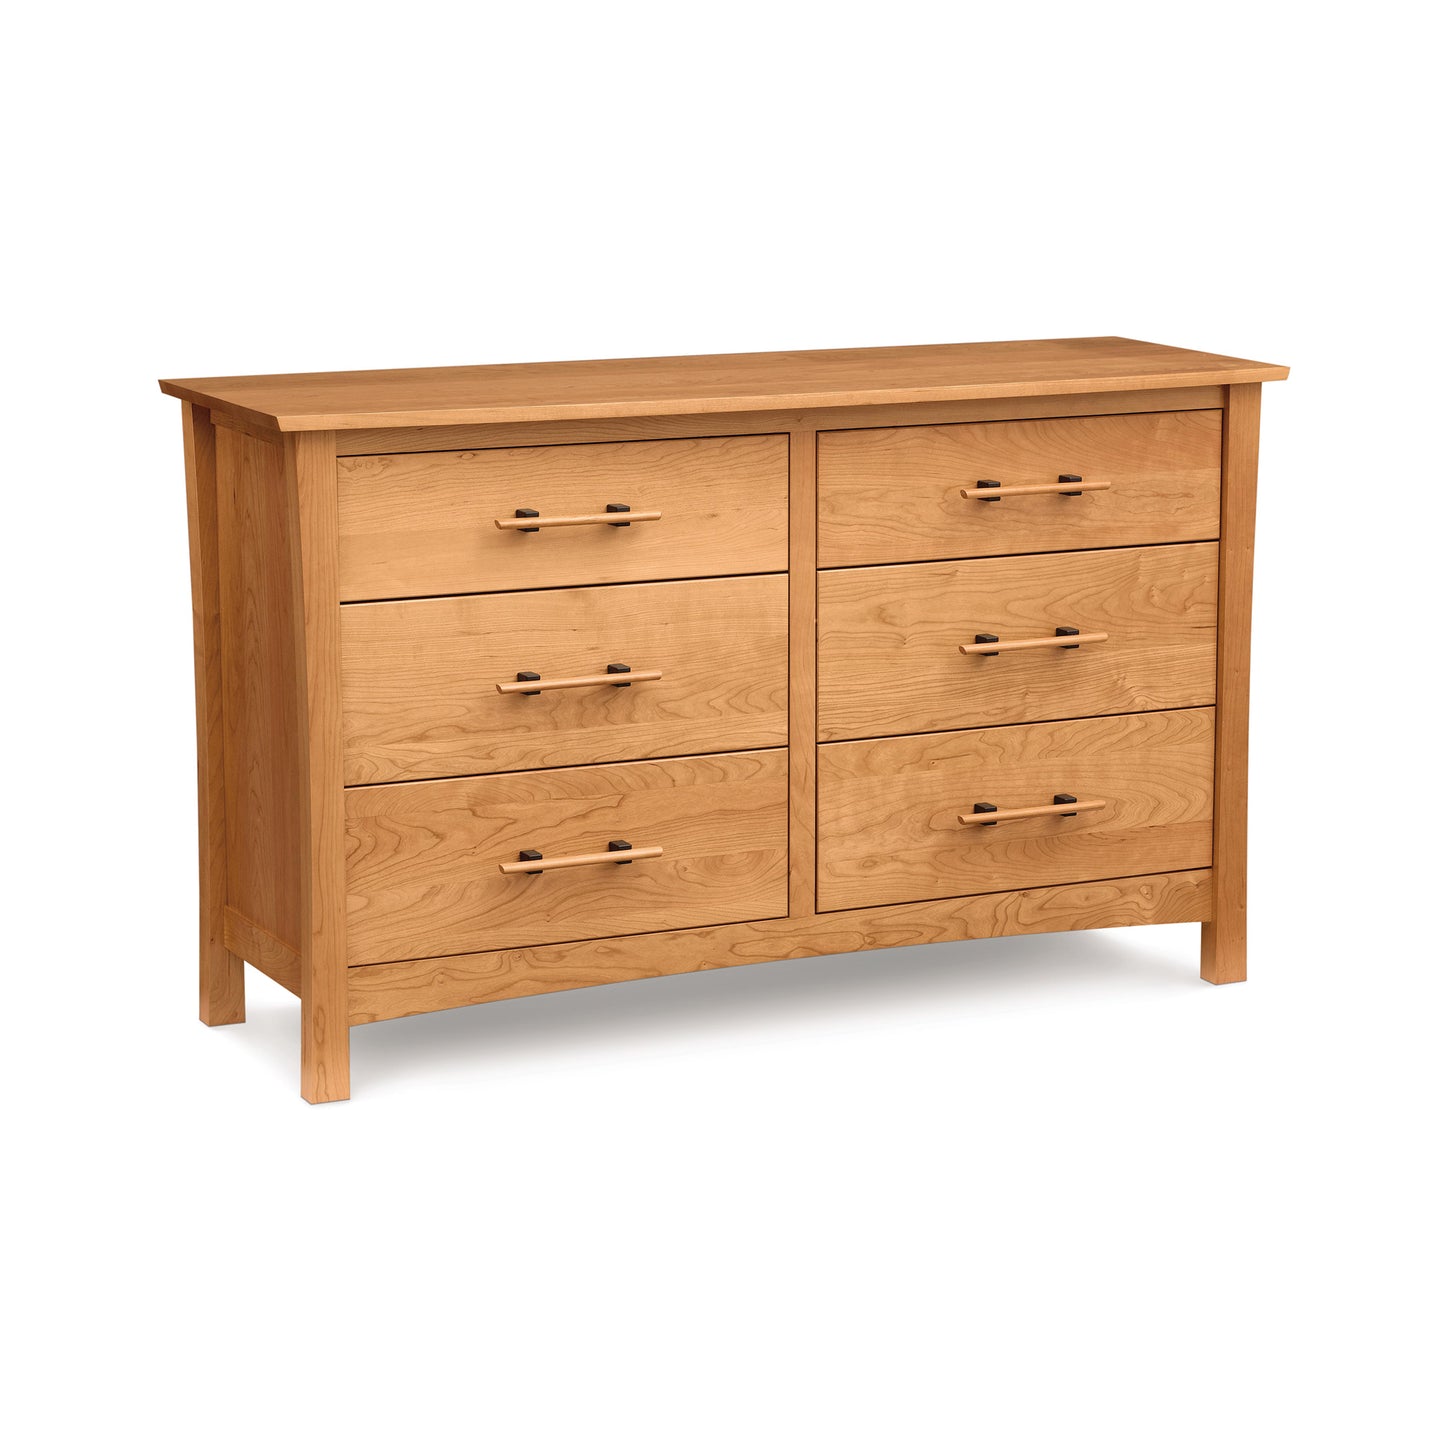 A cherry wood Copeland Furniture Monterey 6-Drawer Dresser with metal handles, isolated on a white background.